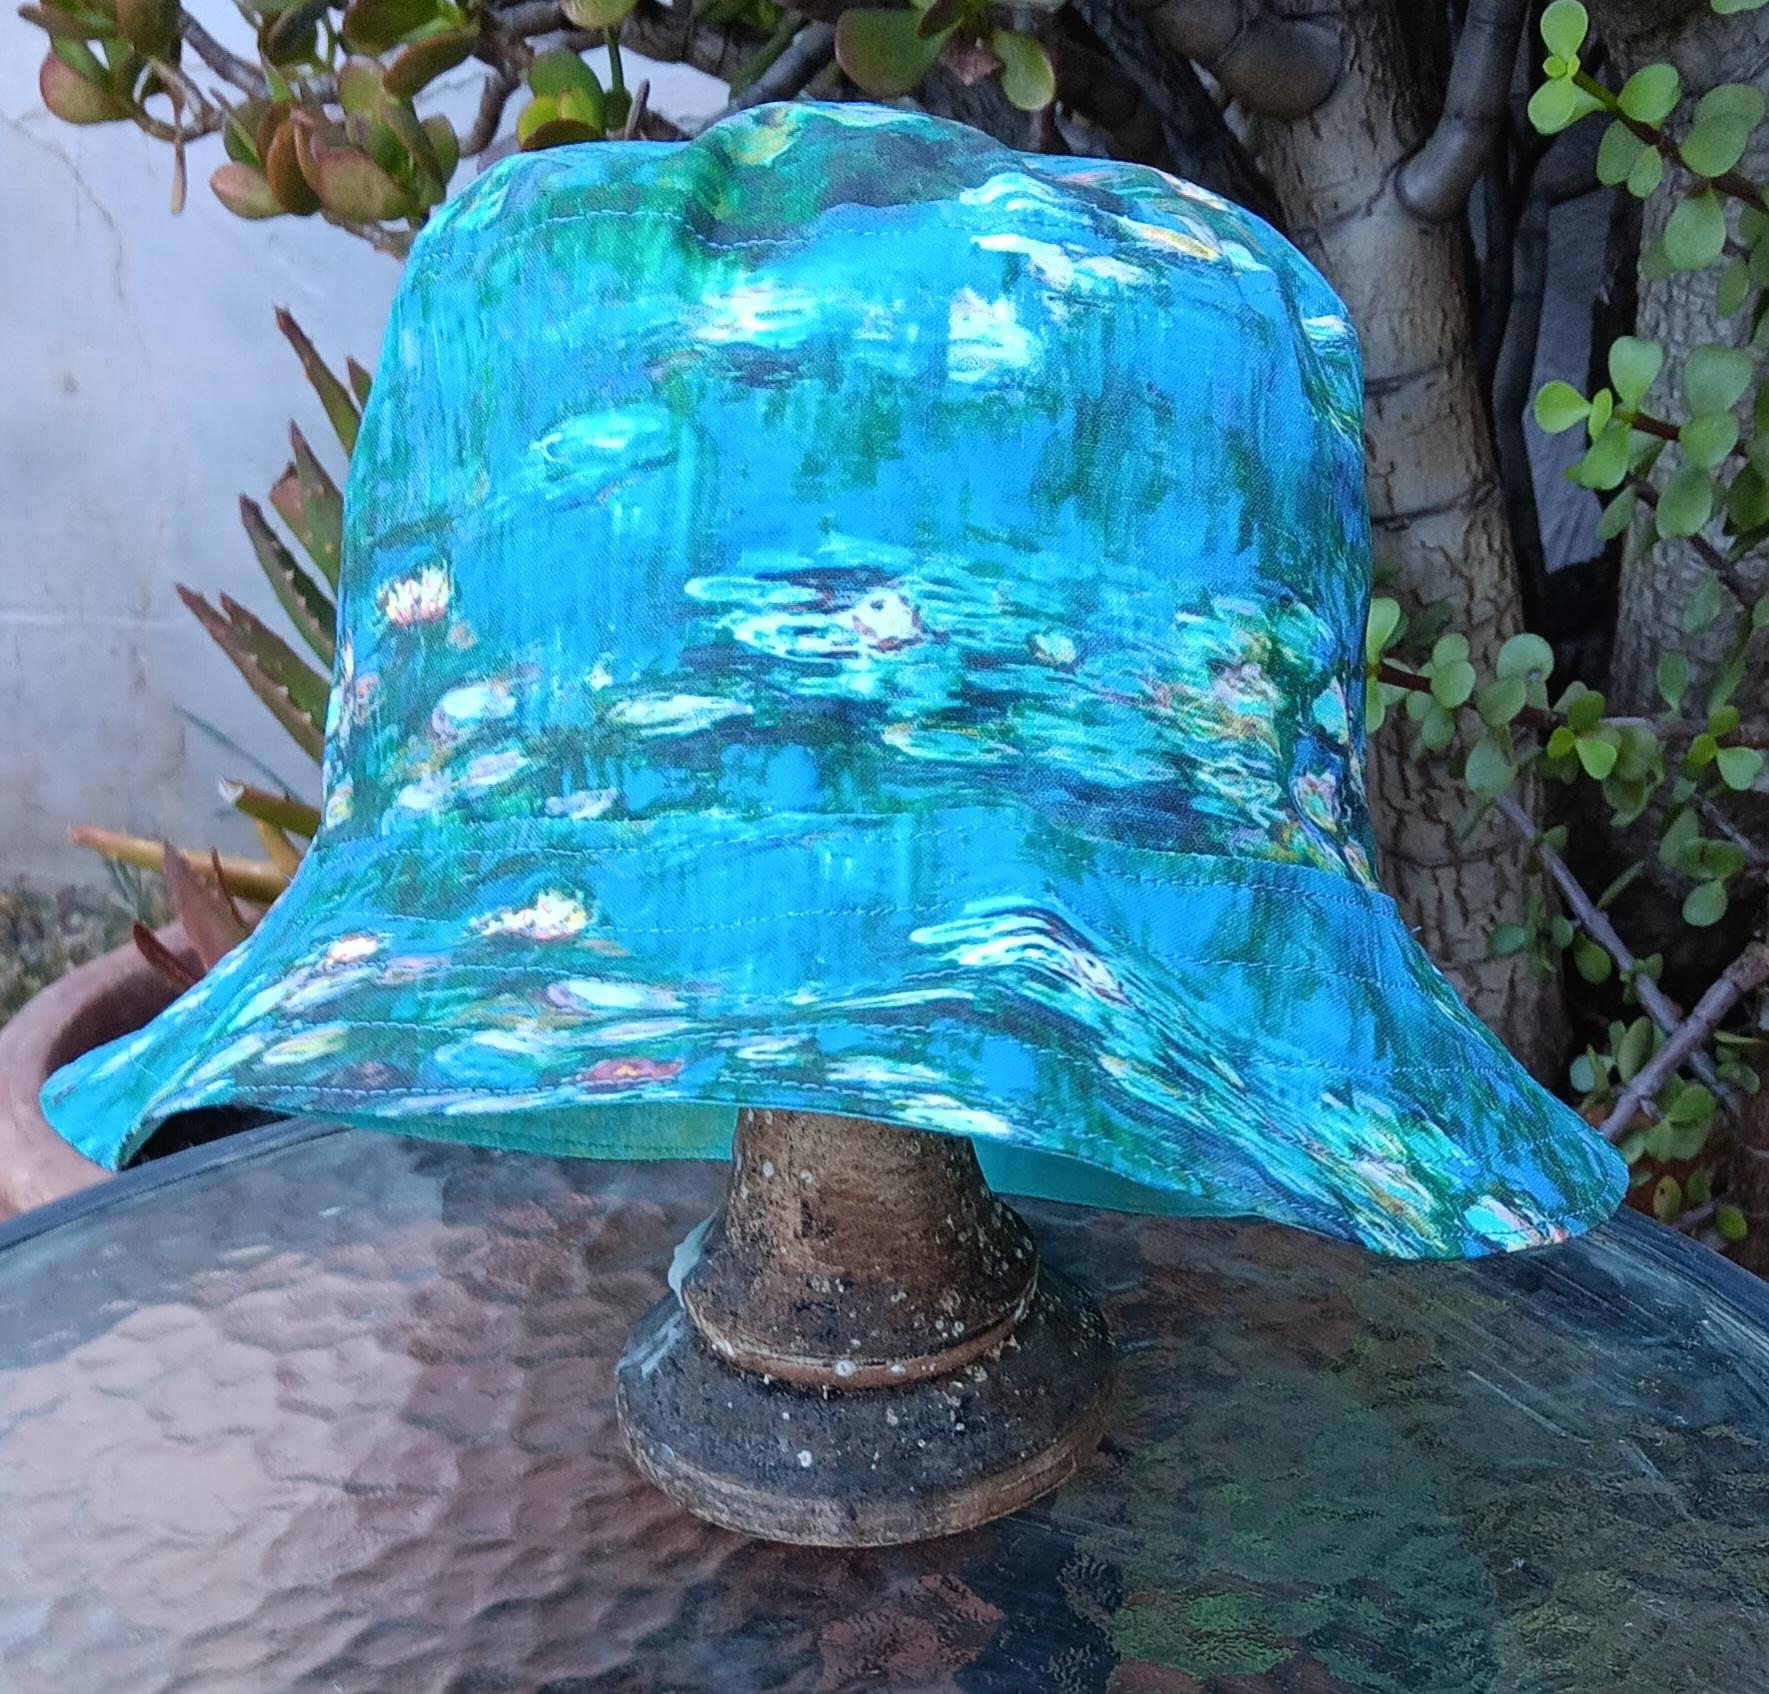 Monet Water Lilies Bucket Hat, Reversible, Size Medium, hat for beach, vacation, gardening, boating, fishing, travel